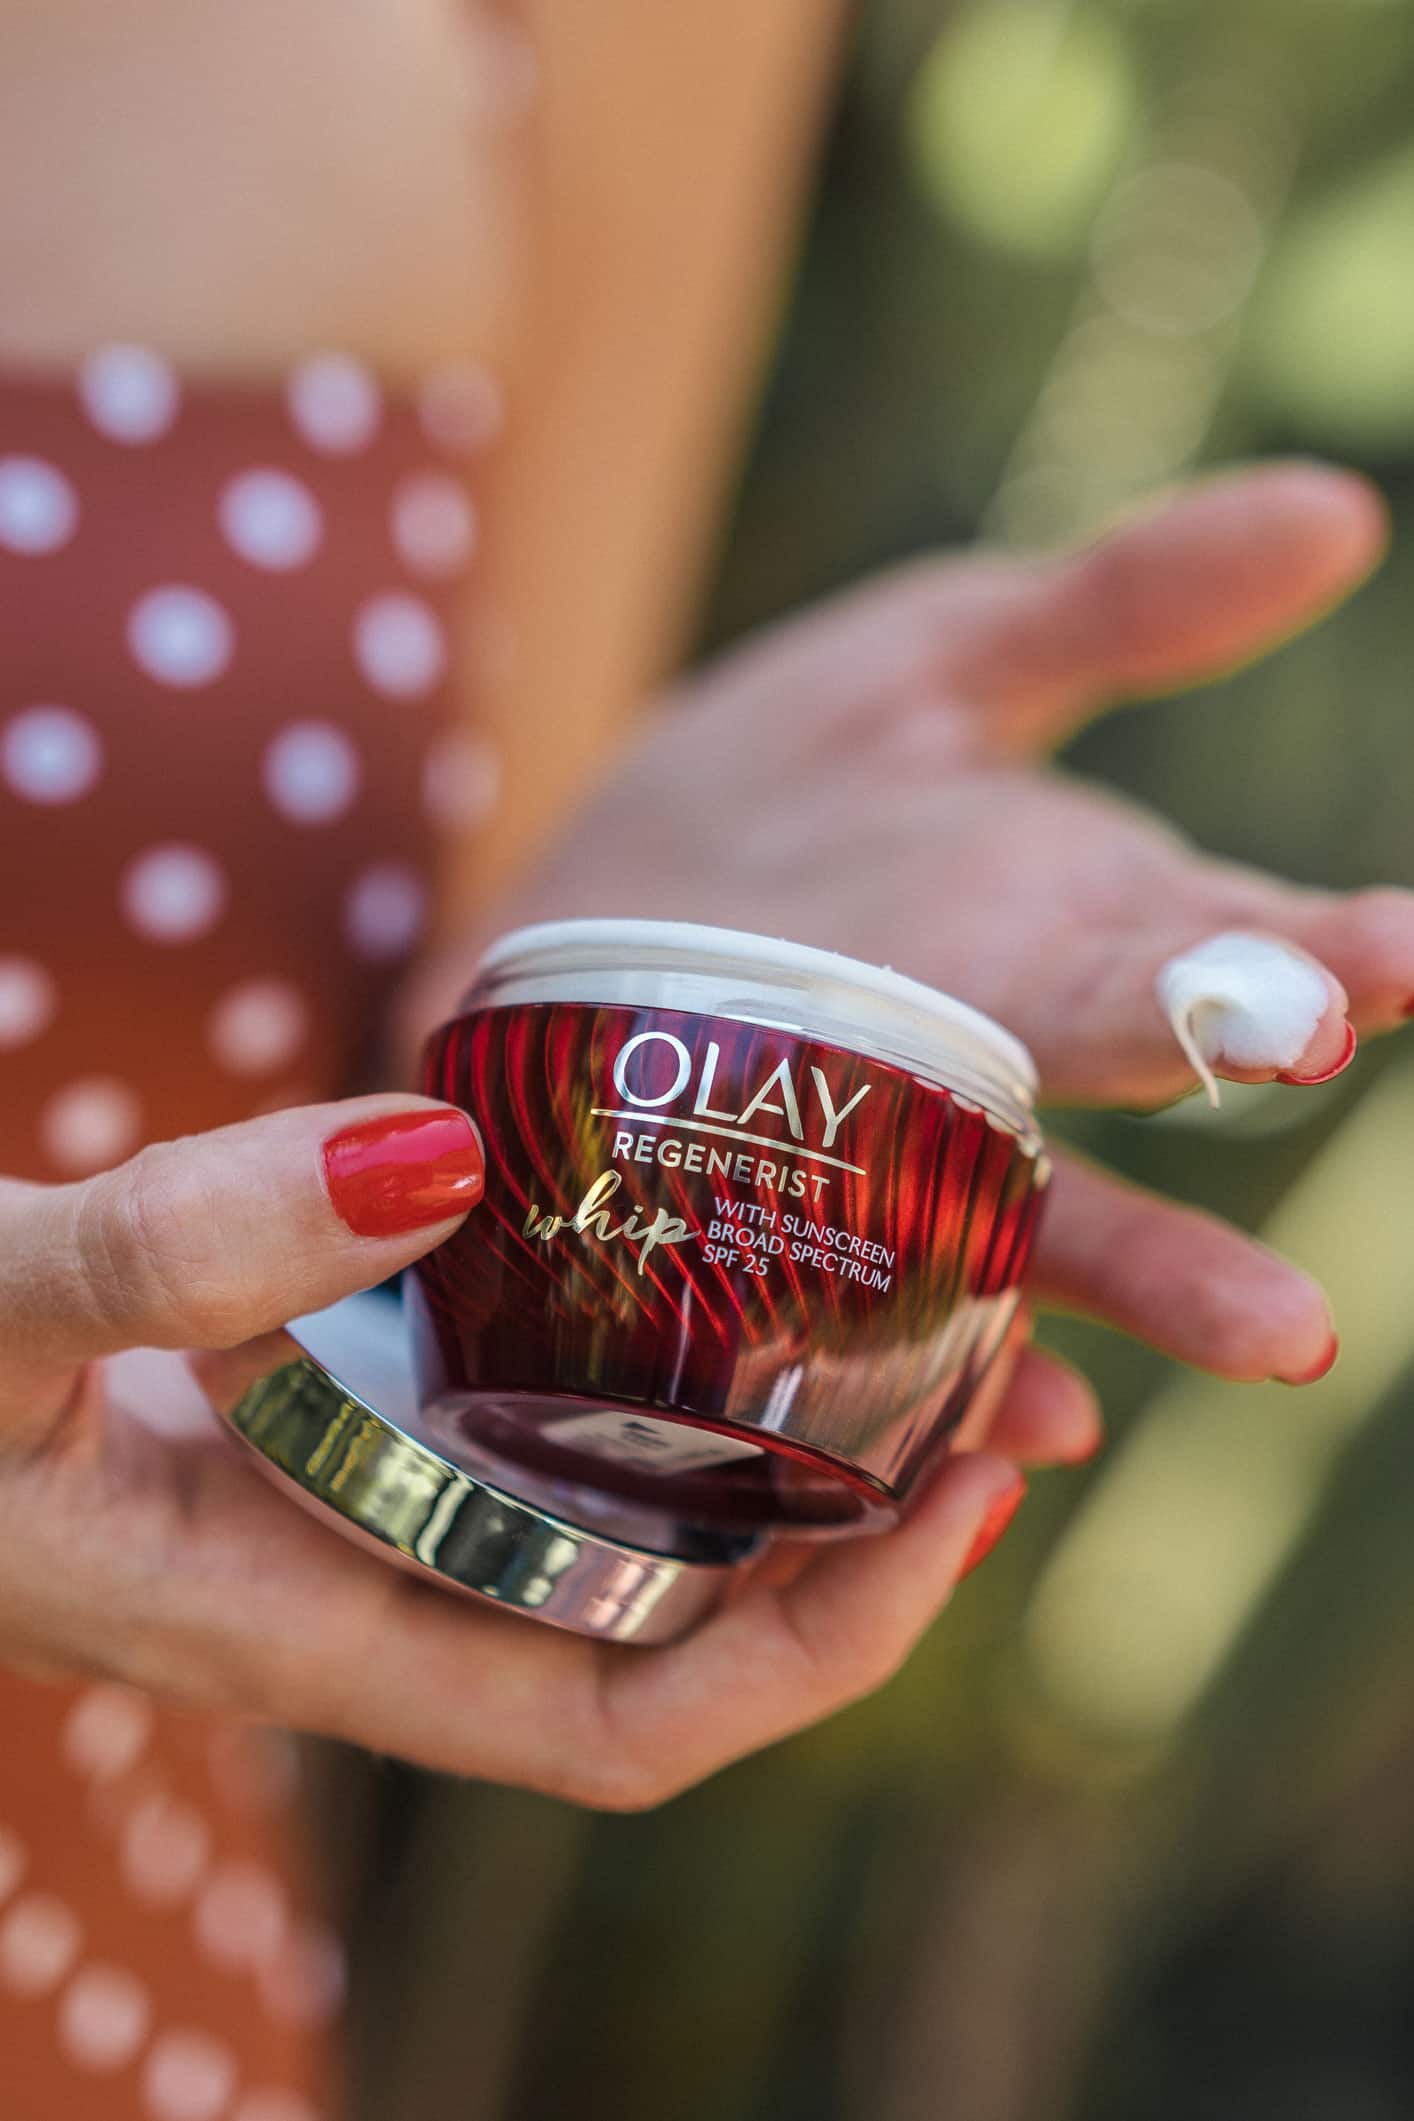 Louise Roe Skincare Tips Featuring Olay Whips SPF moisturizer